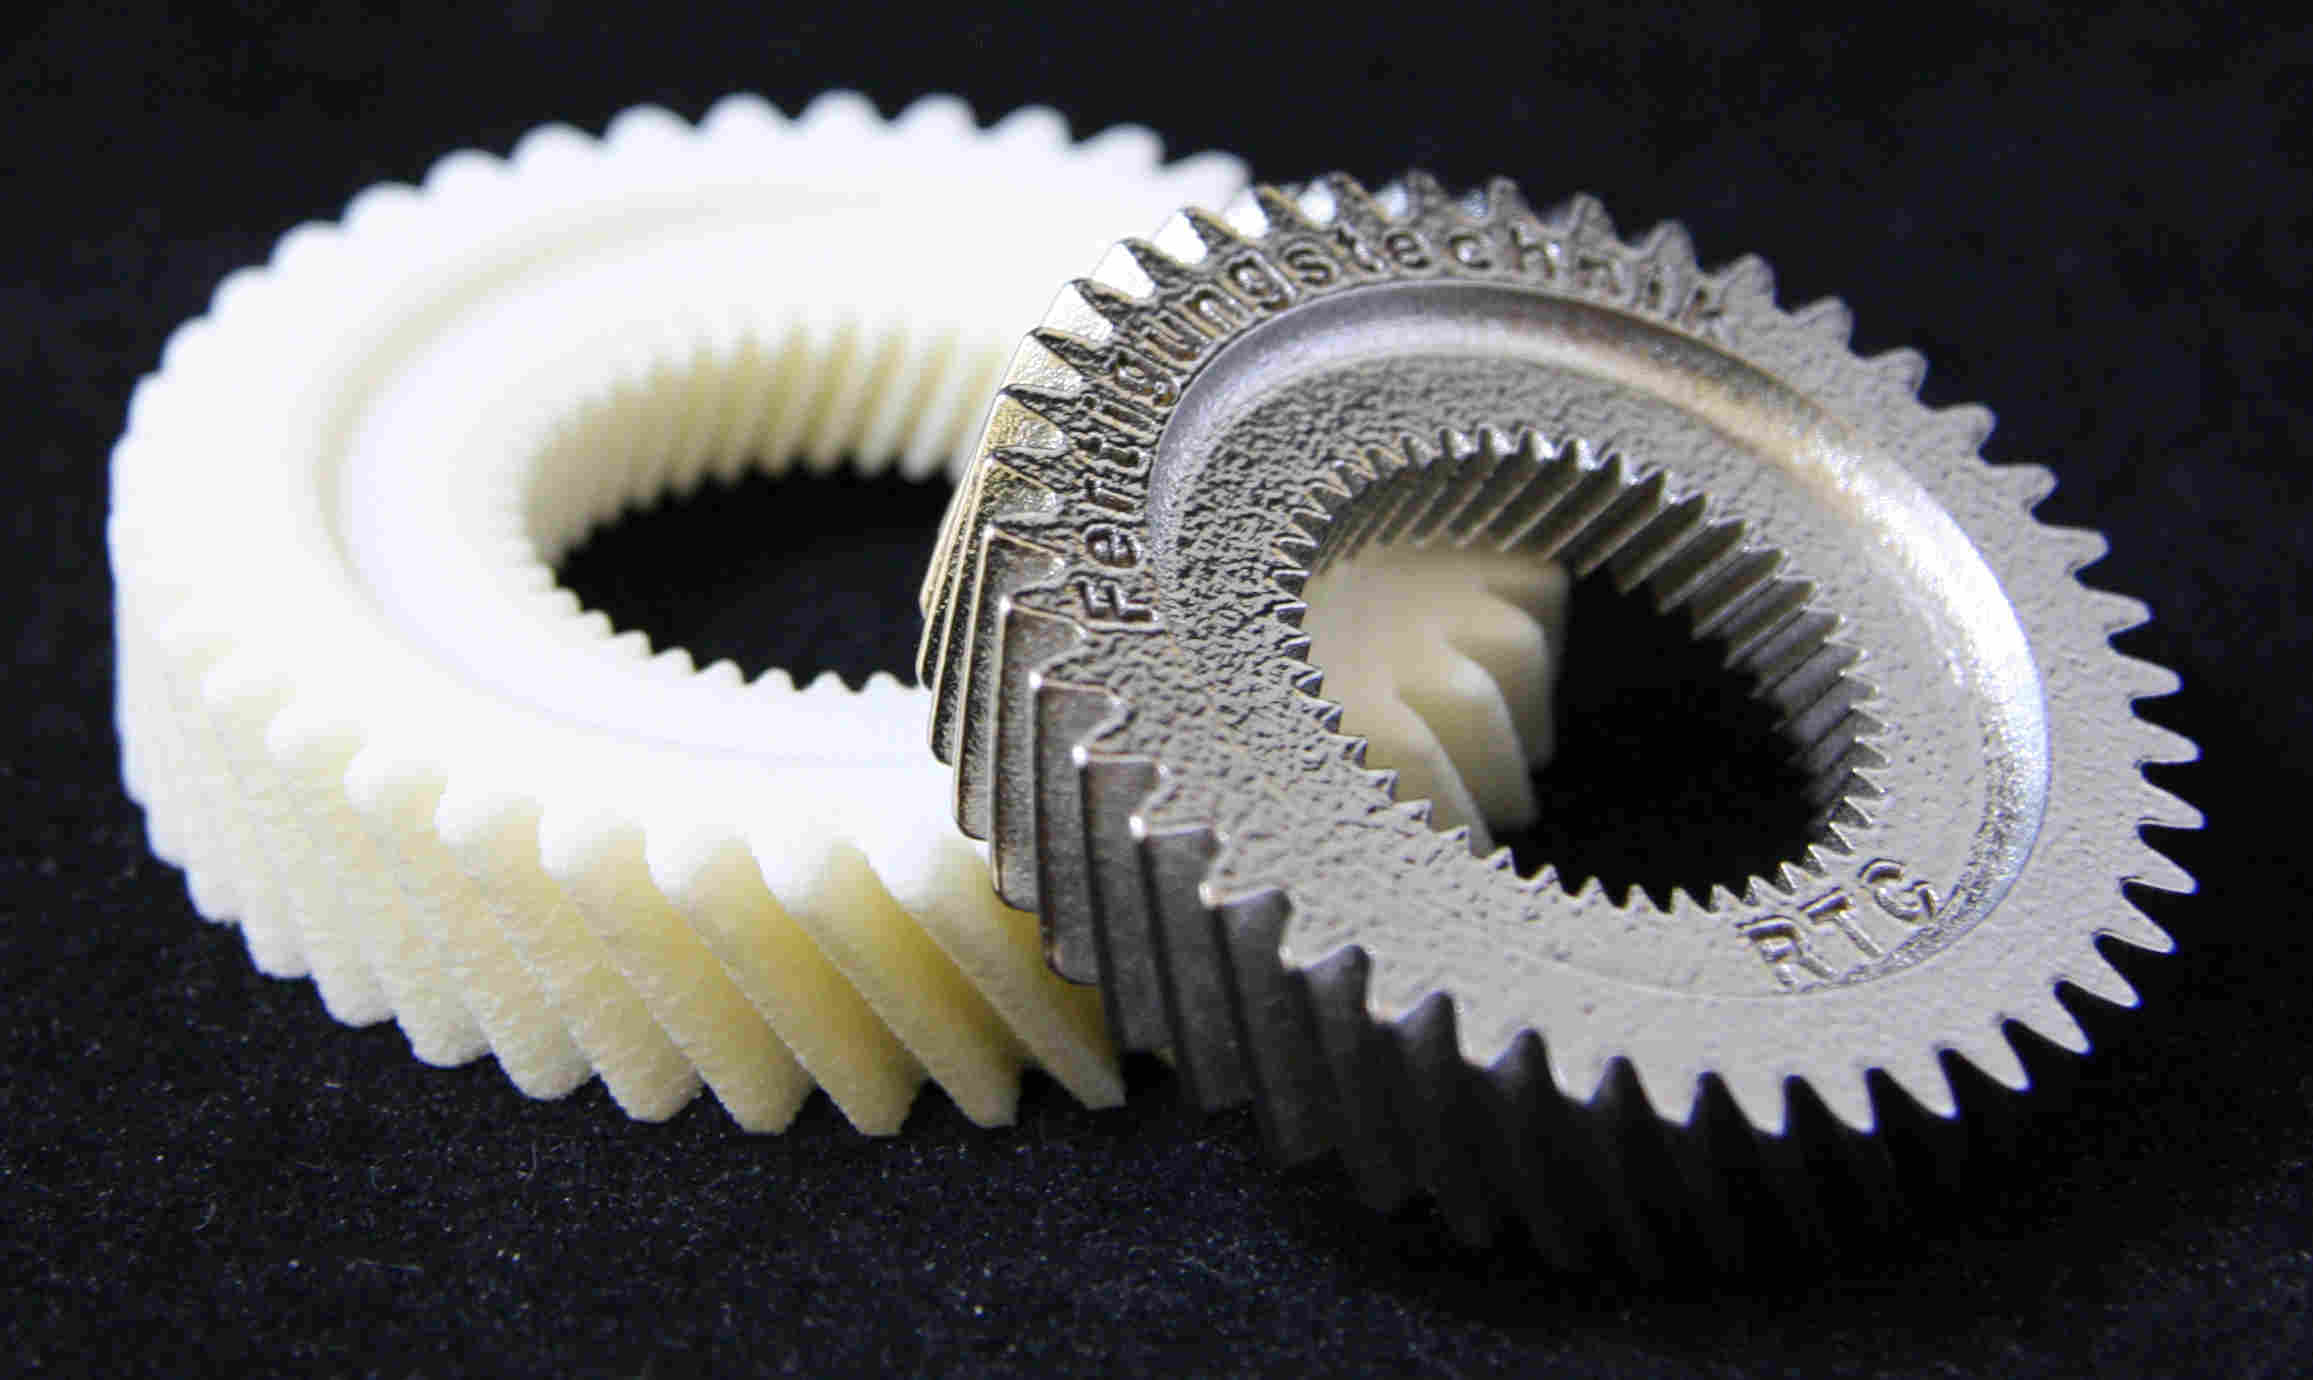 CAD Innovations in Rapid Prototyping